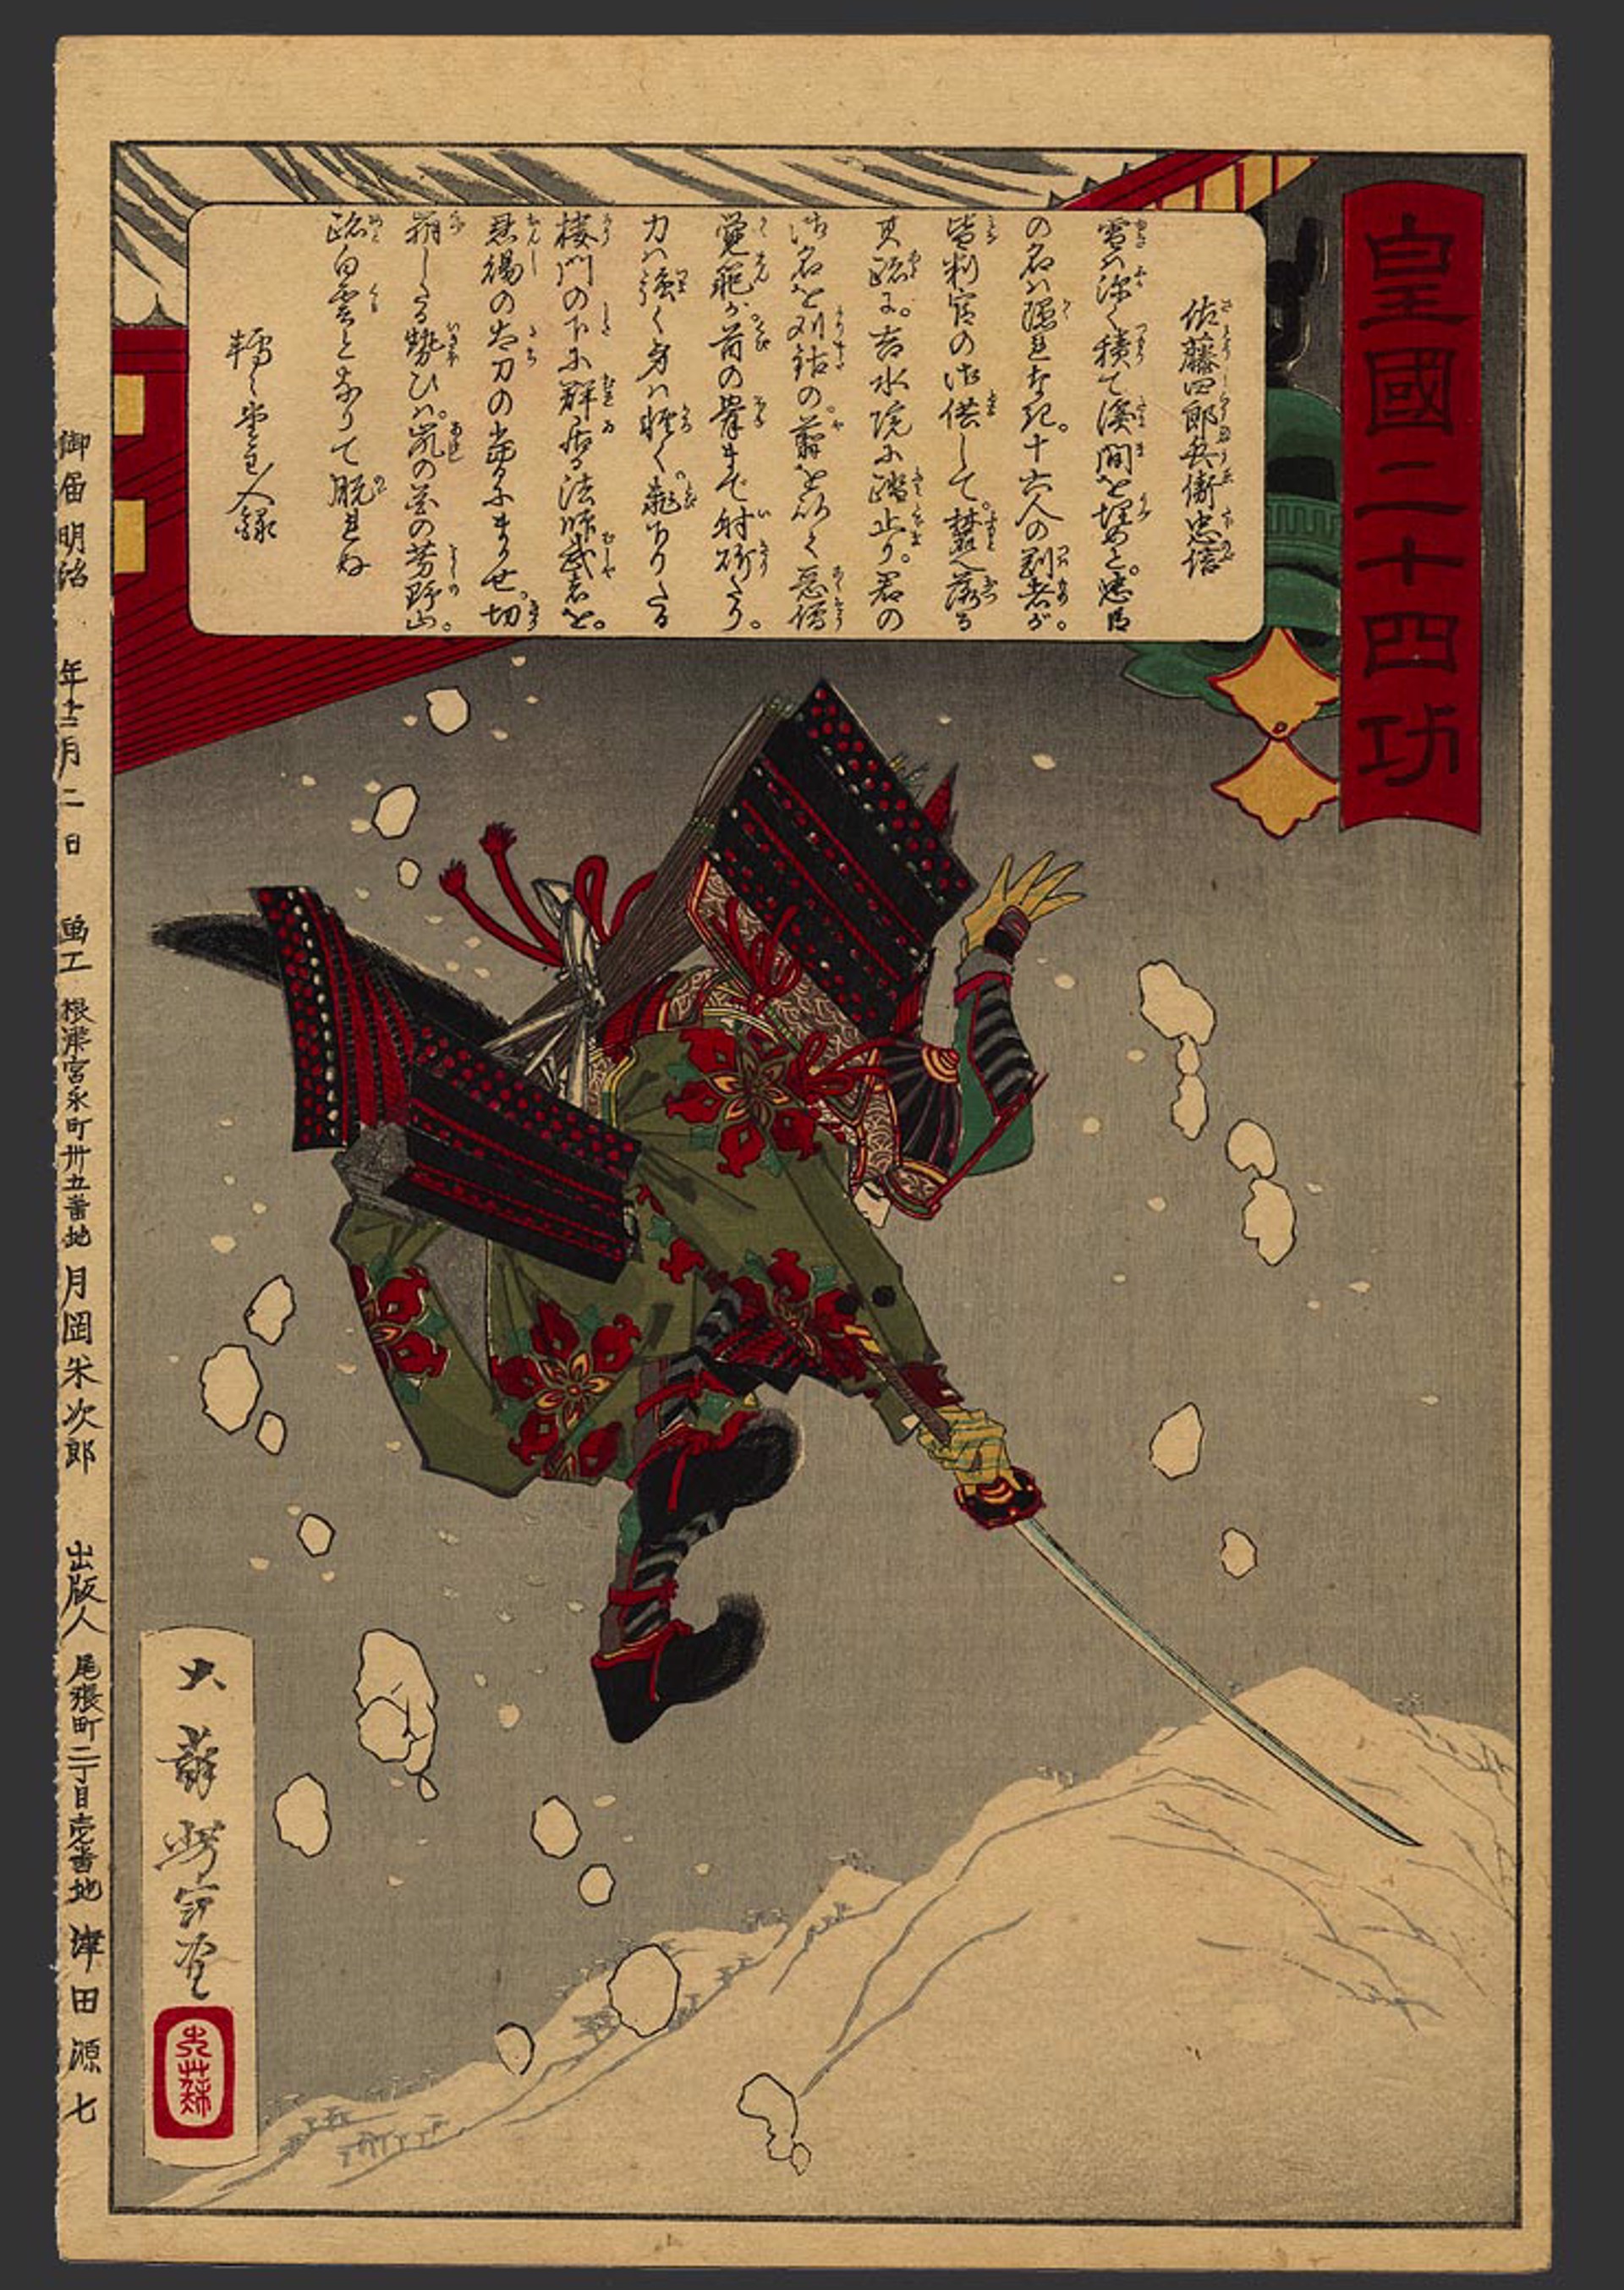 #16 Sato Shirobyoe Tadanobu leaping from a snowy roof. (1160-85) 24 Accomplishments in Imperial Japan by Yoshitoshi